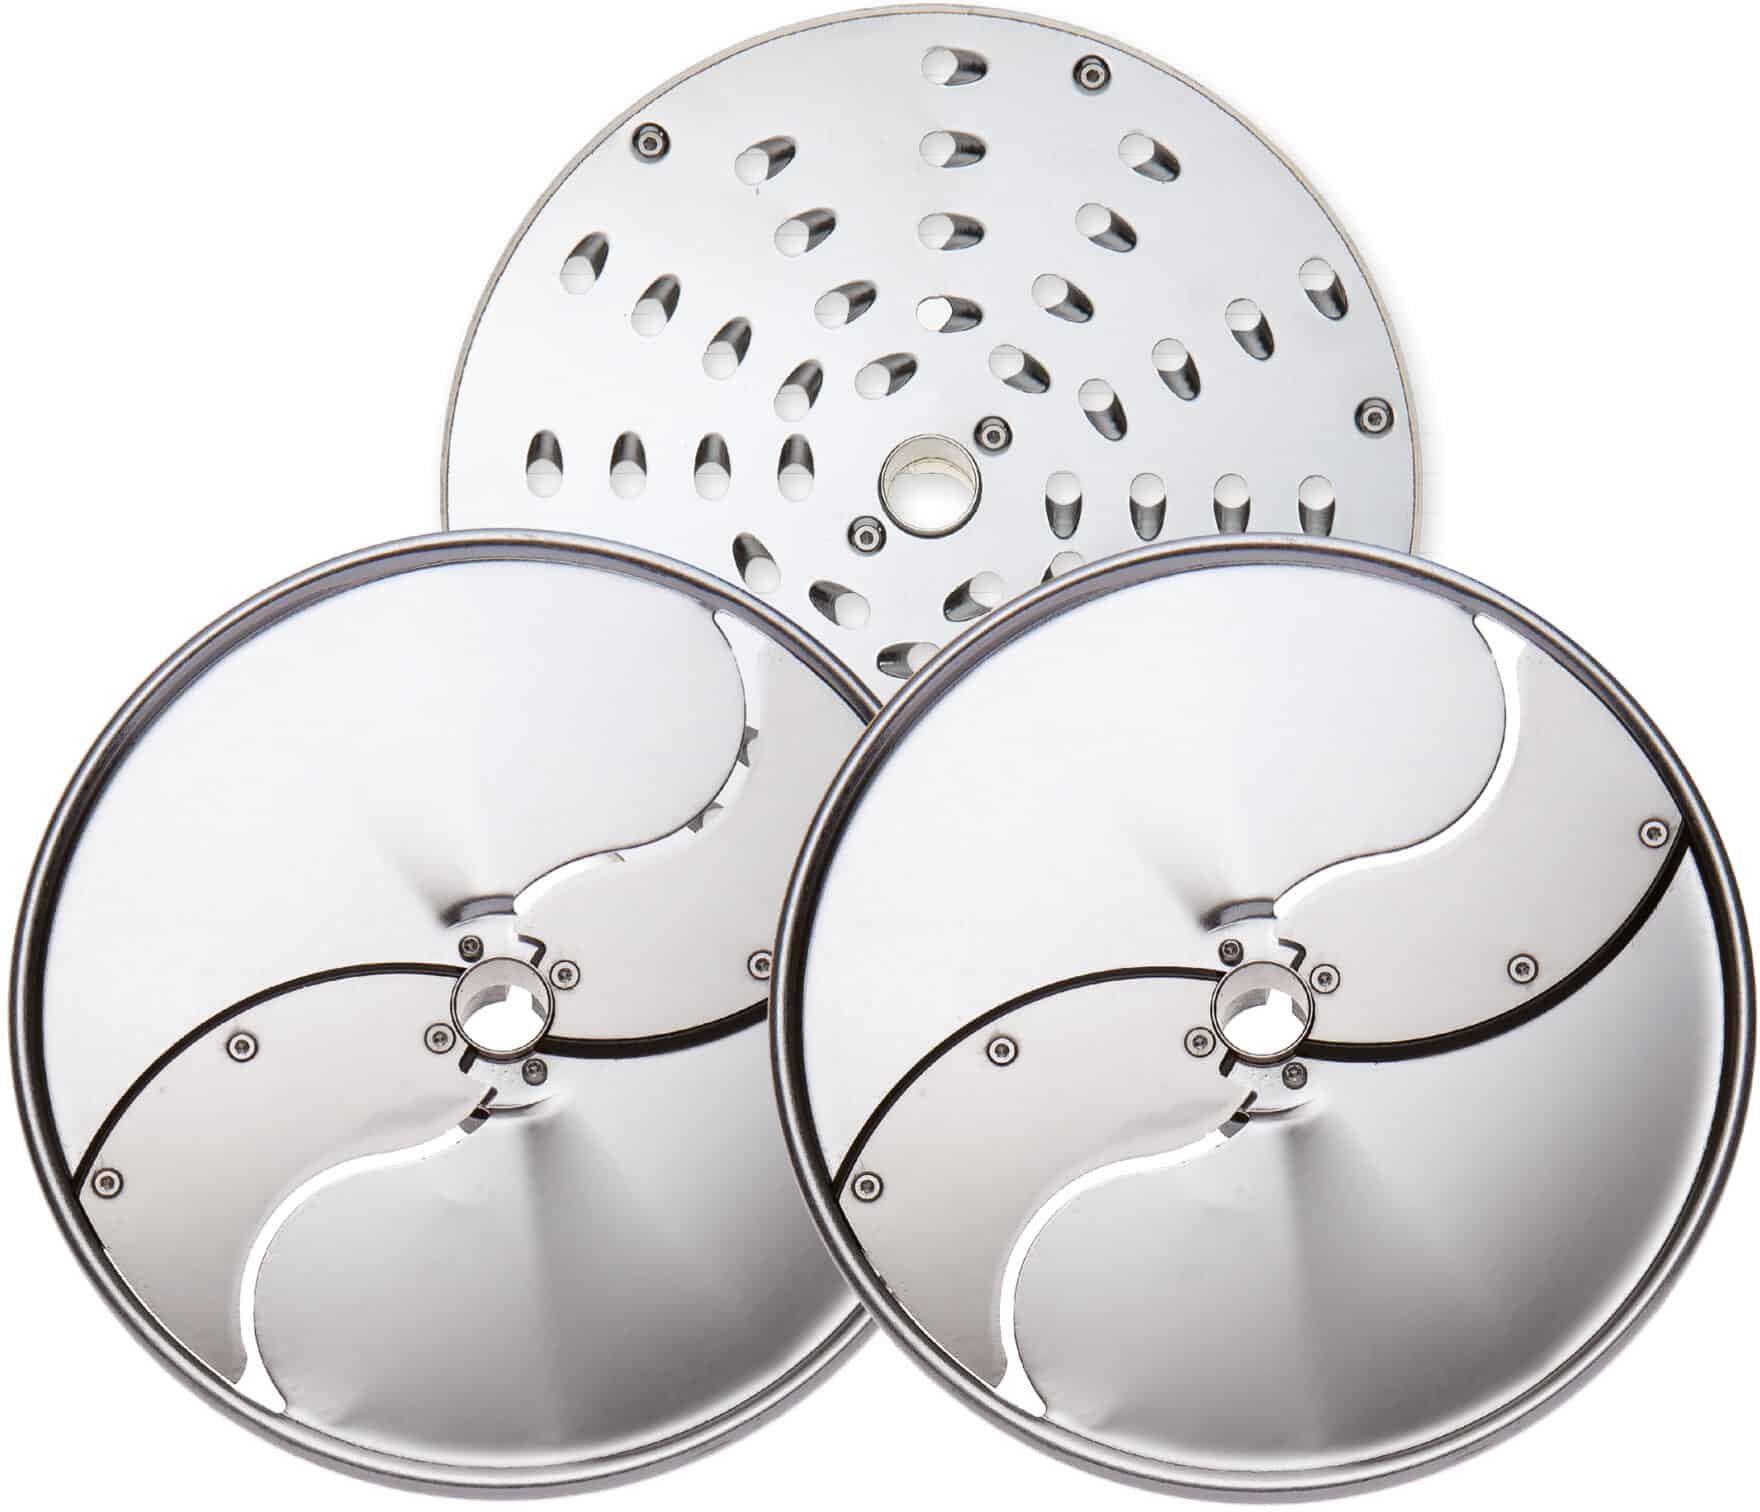 DITO SAMA - Set of 3 Stainless Steel Pizza Discs - 650107